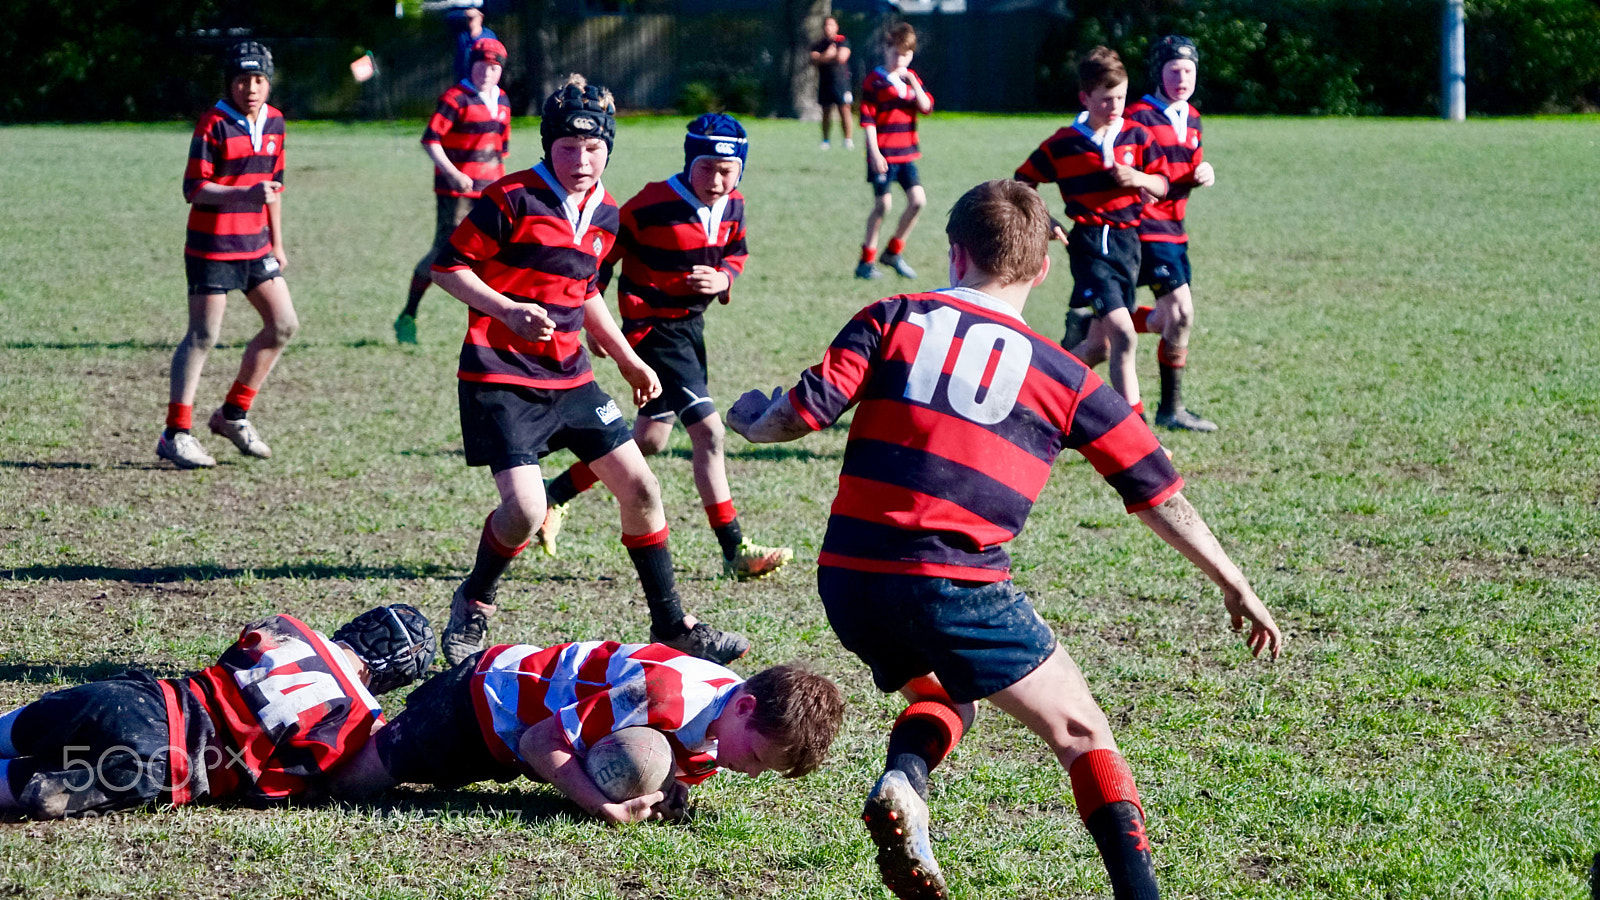 Sony a7 sample photo. Rugby photography